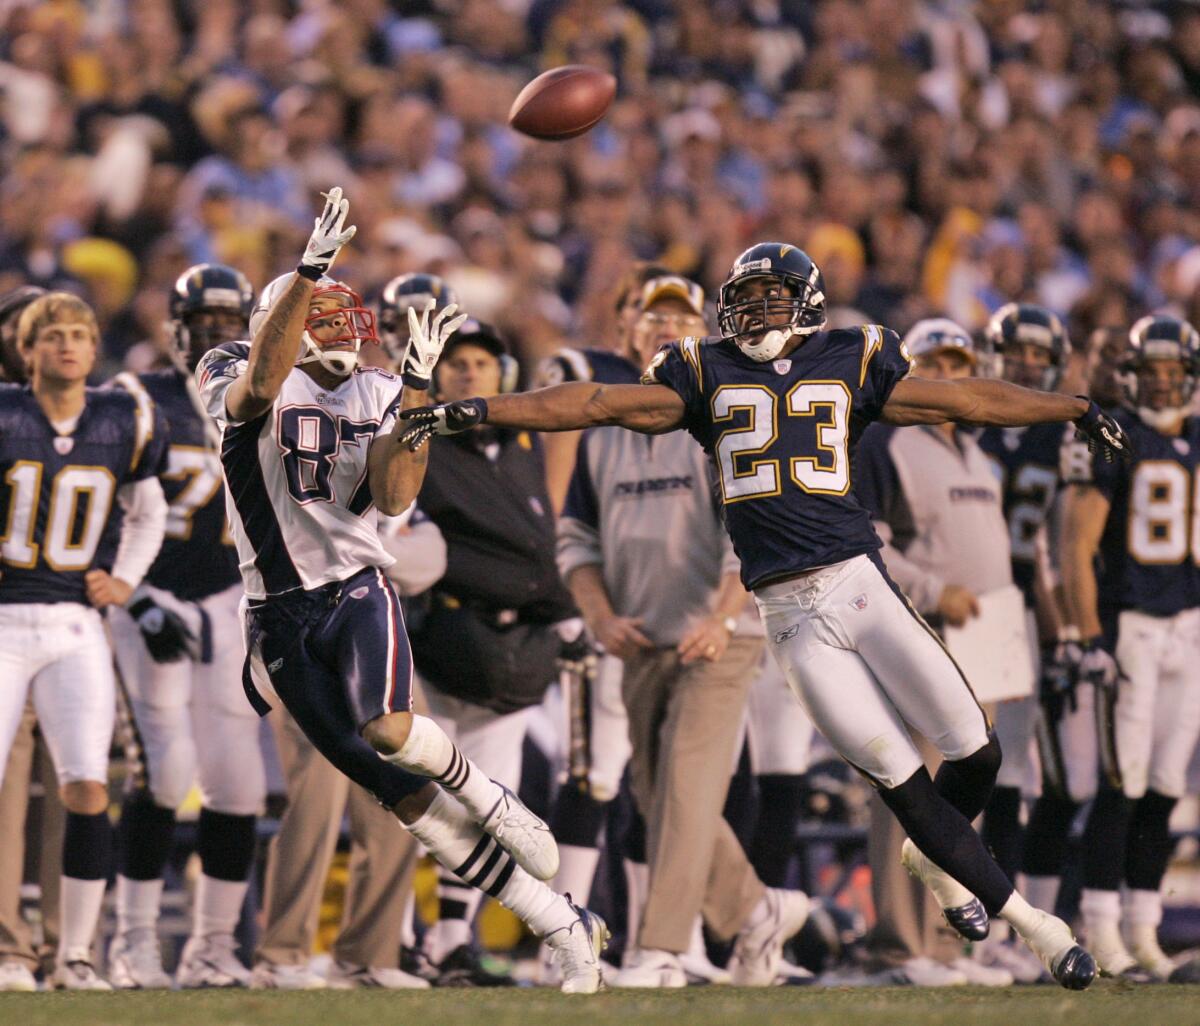 New England Patriots wide receiver Reche Caldwell catches pass over San Diego Chargers cornerback Quentin Jammer.